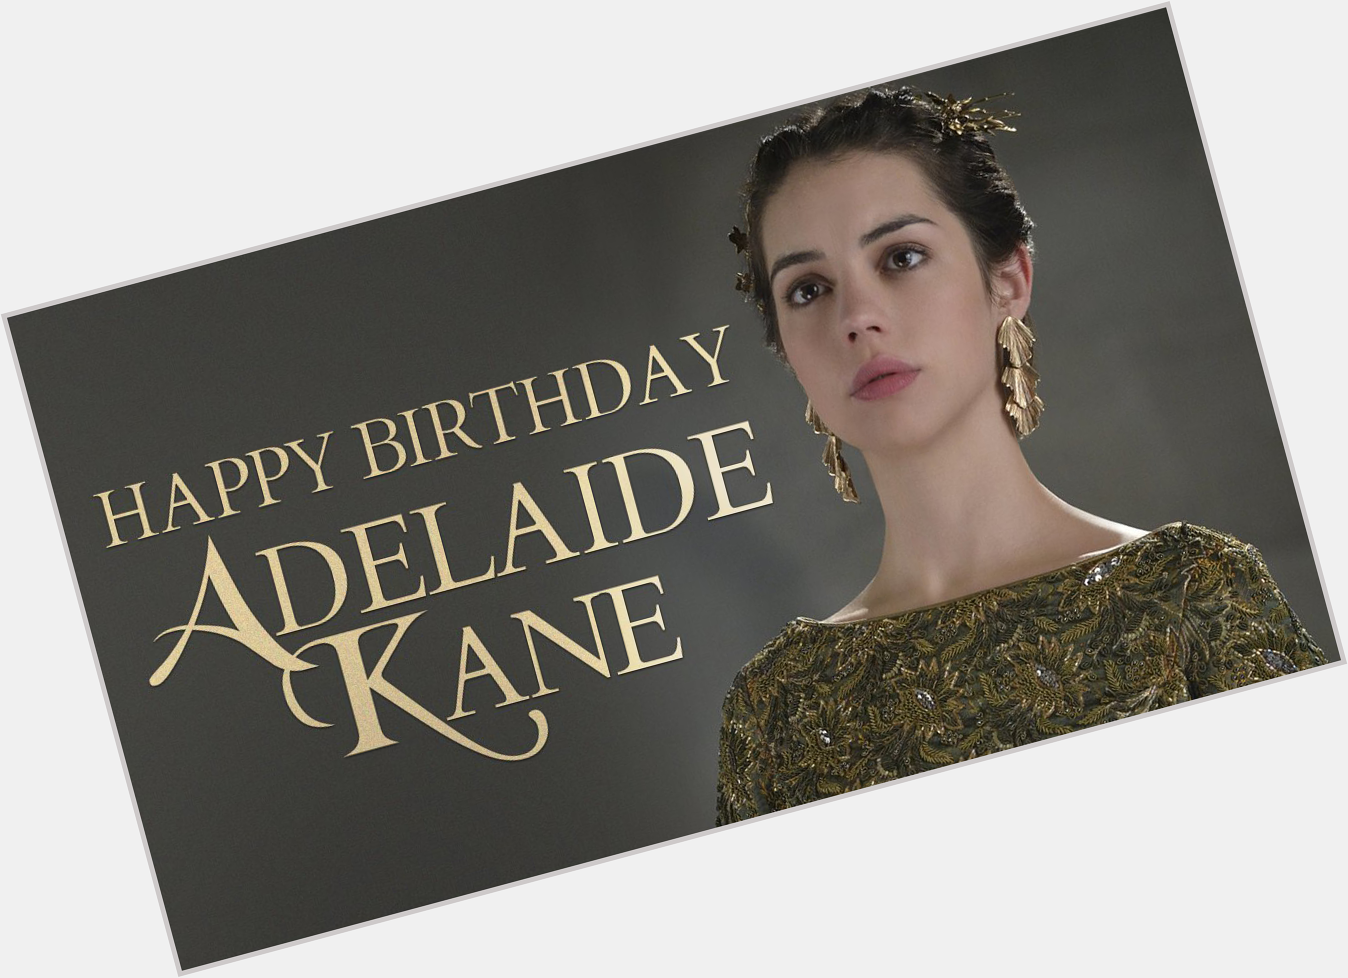 Give Adelaide Kane the royal treatment and wish her a happy birthday! 